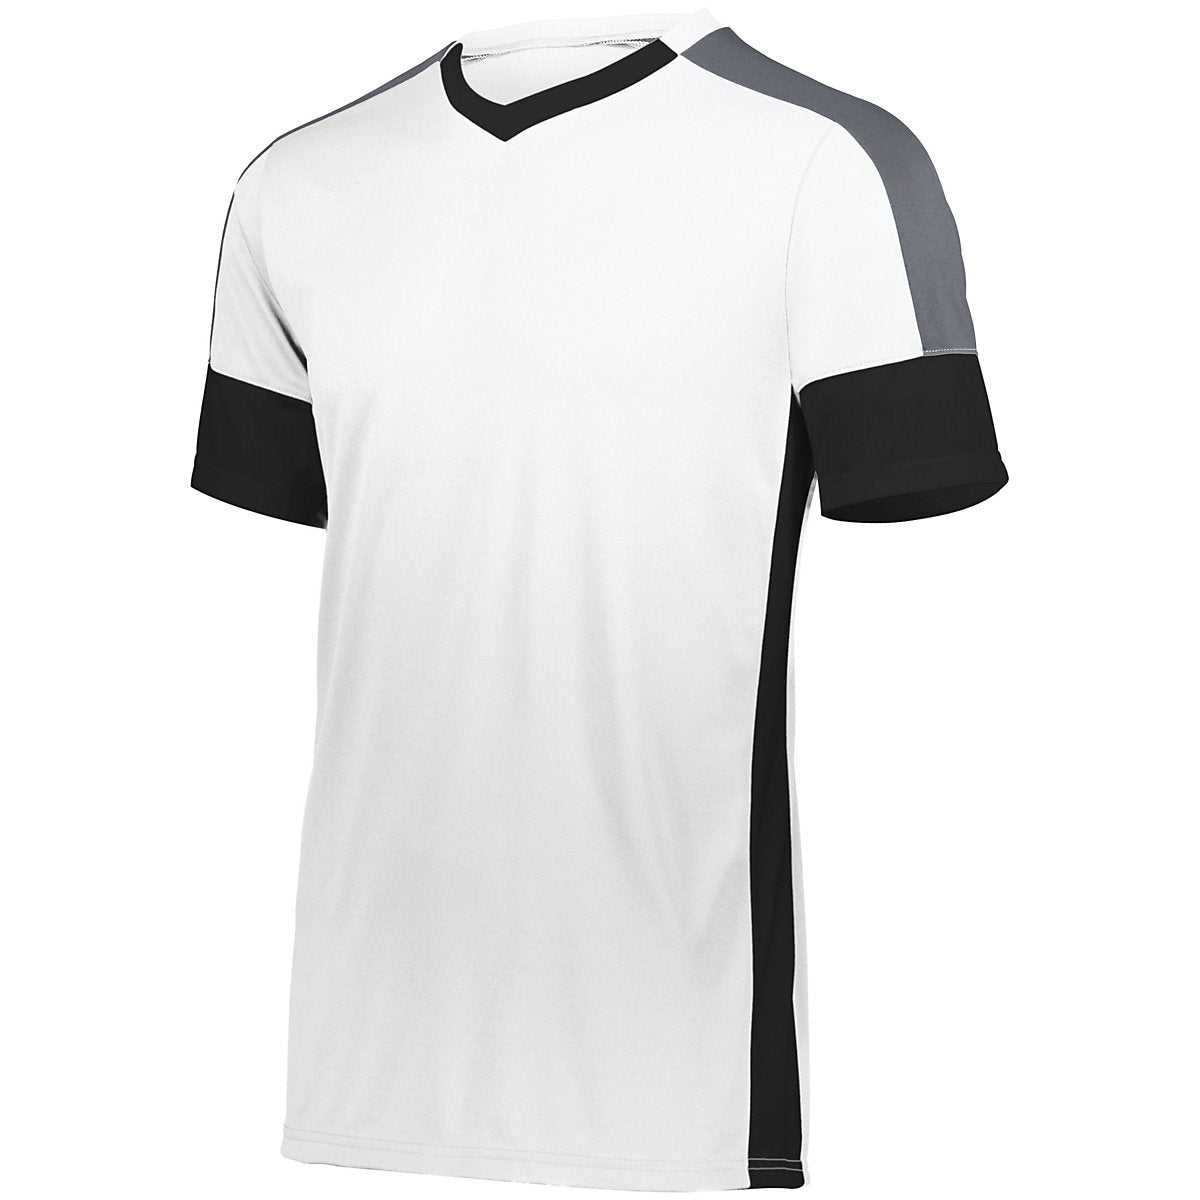 High Five 322930 Wembley Soccer Jersey - White Black Graphite - HIT a Double